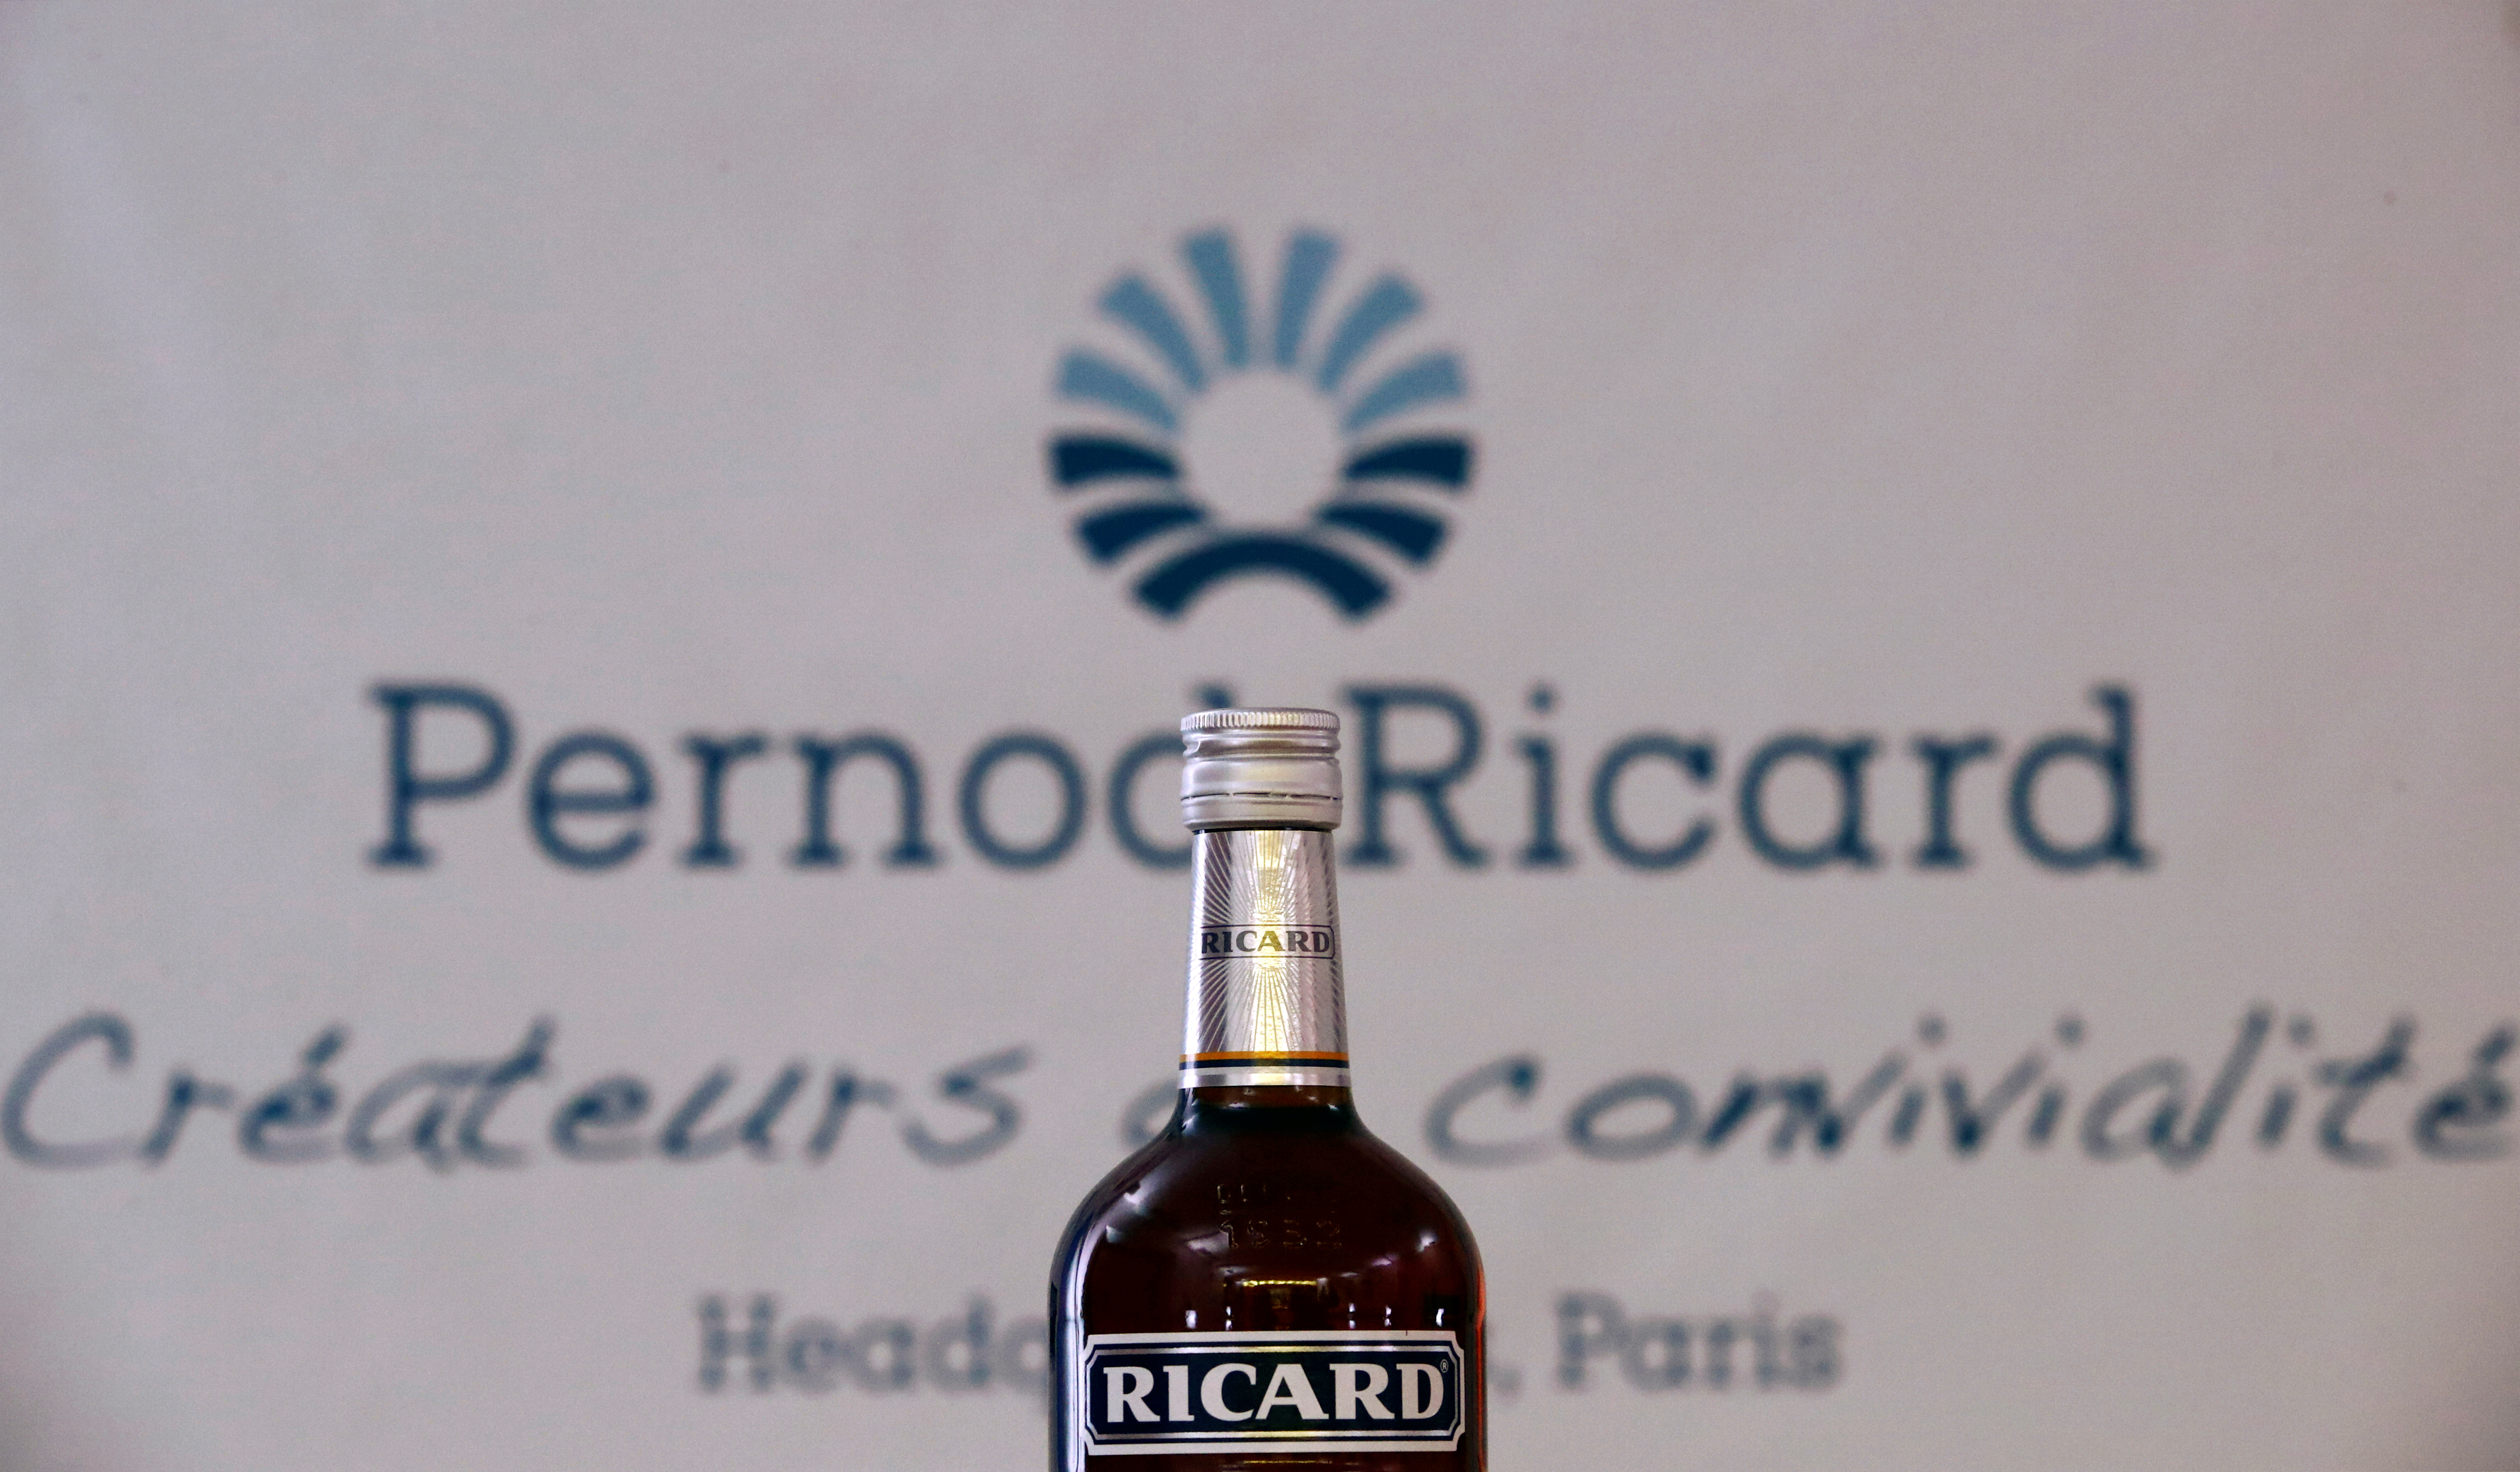 https://img5.s3wfg.com/web/img/images_uploaded/9/f/pernod-ricard-grimpe-barclays-confiant-pour-l-exercice-2021.jpg